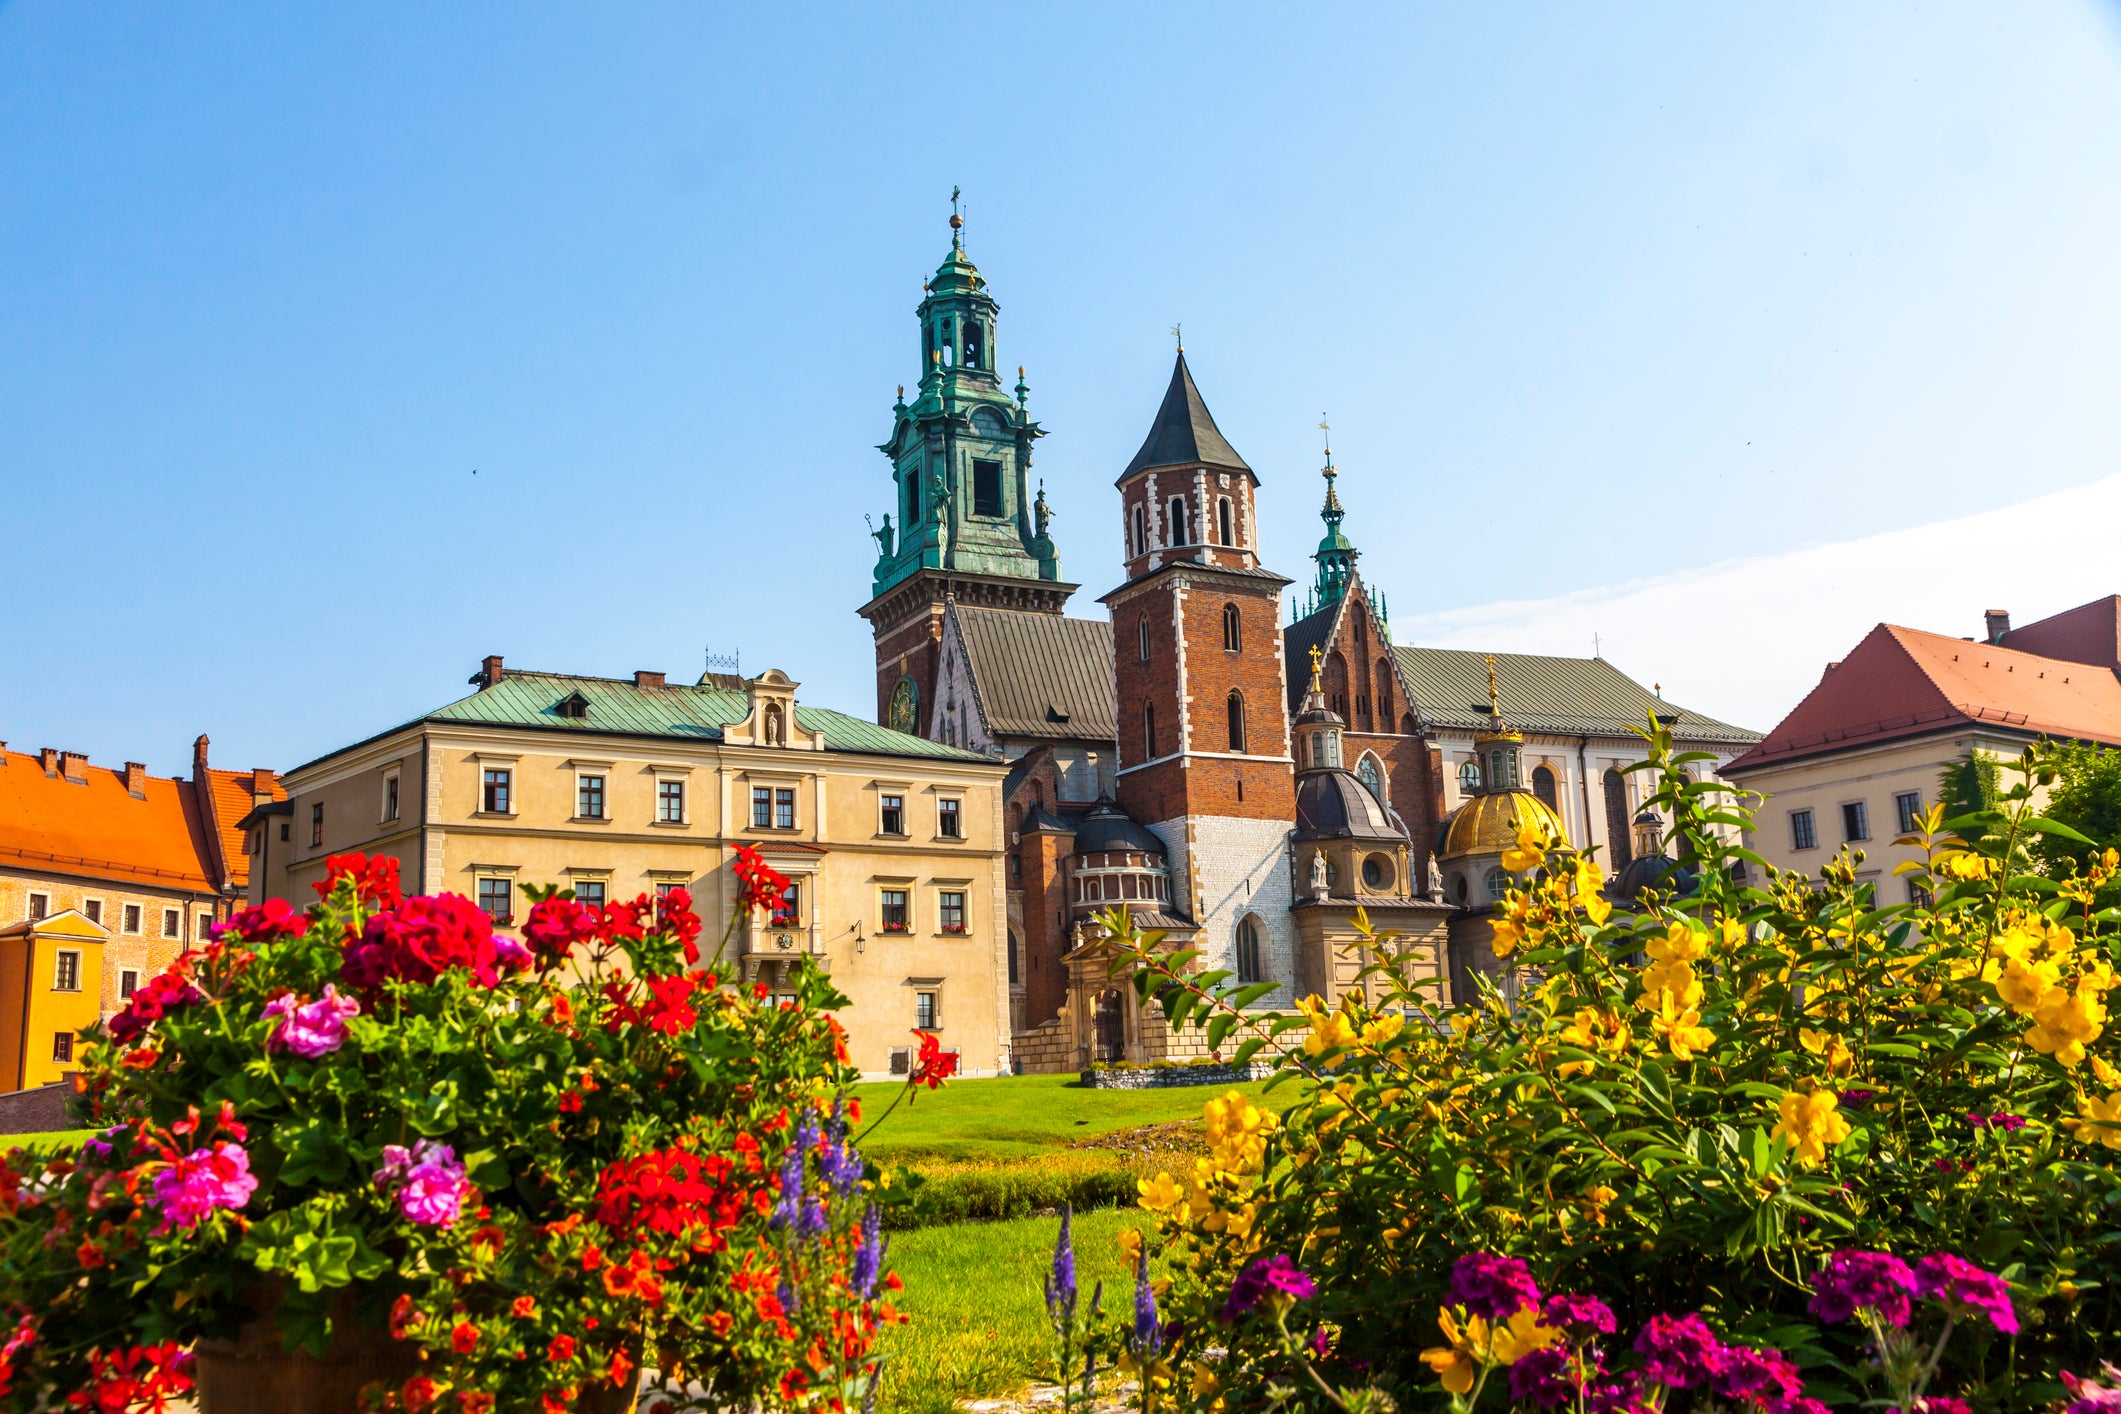 Krakow, the cultural heart of Poland, is a maze of vibrant market squares